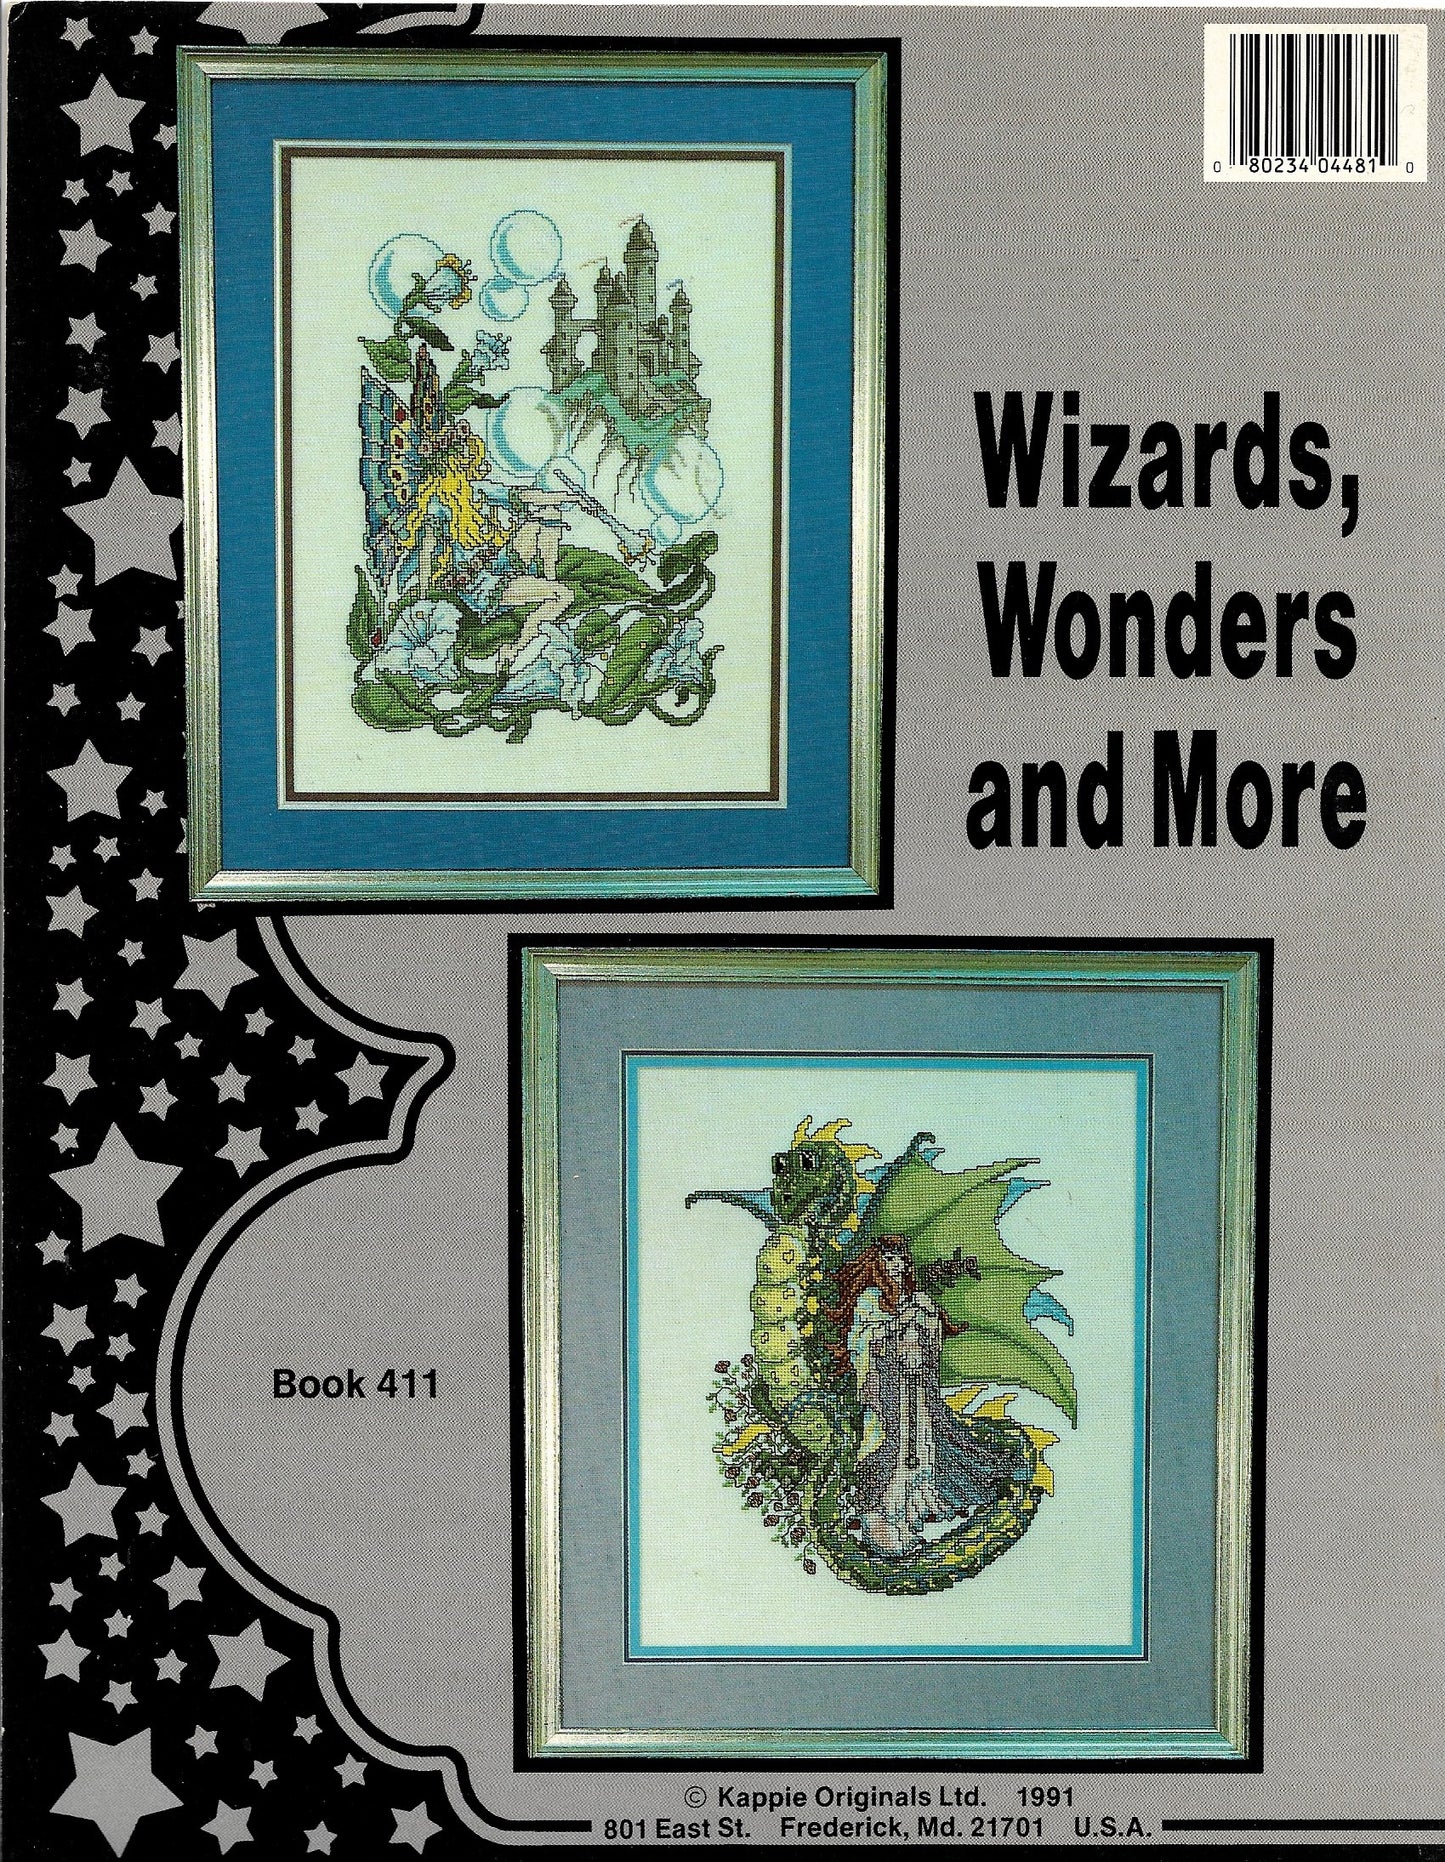 Fantasy Wizards, Wonders and More pattern